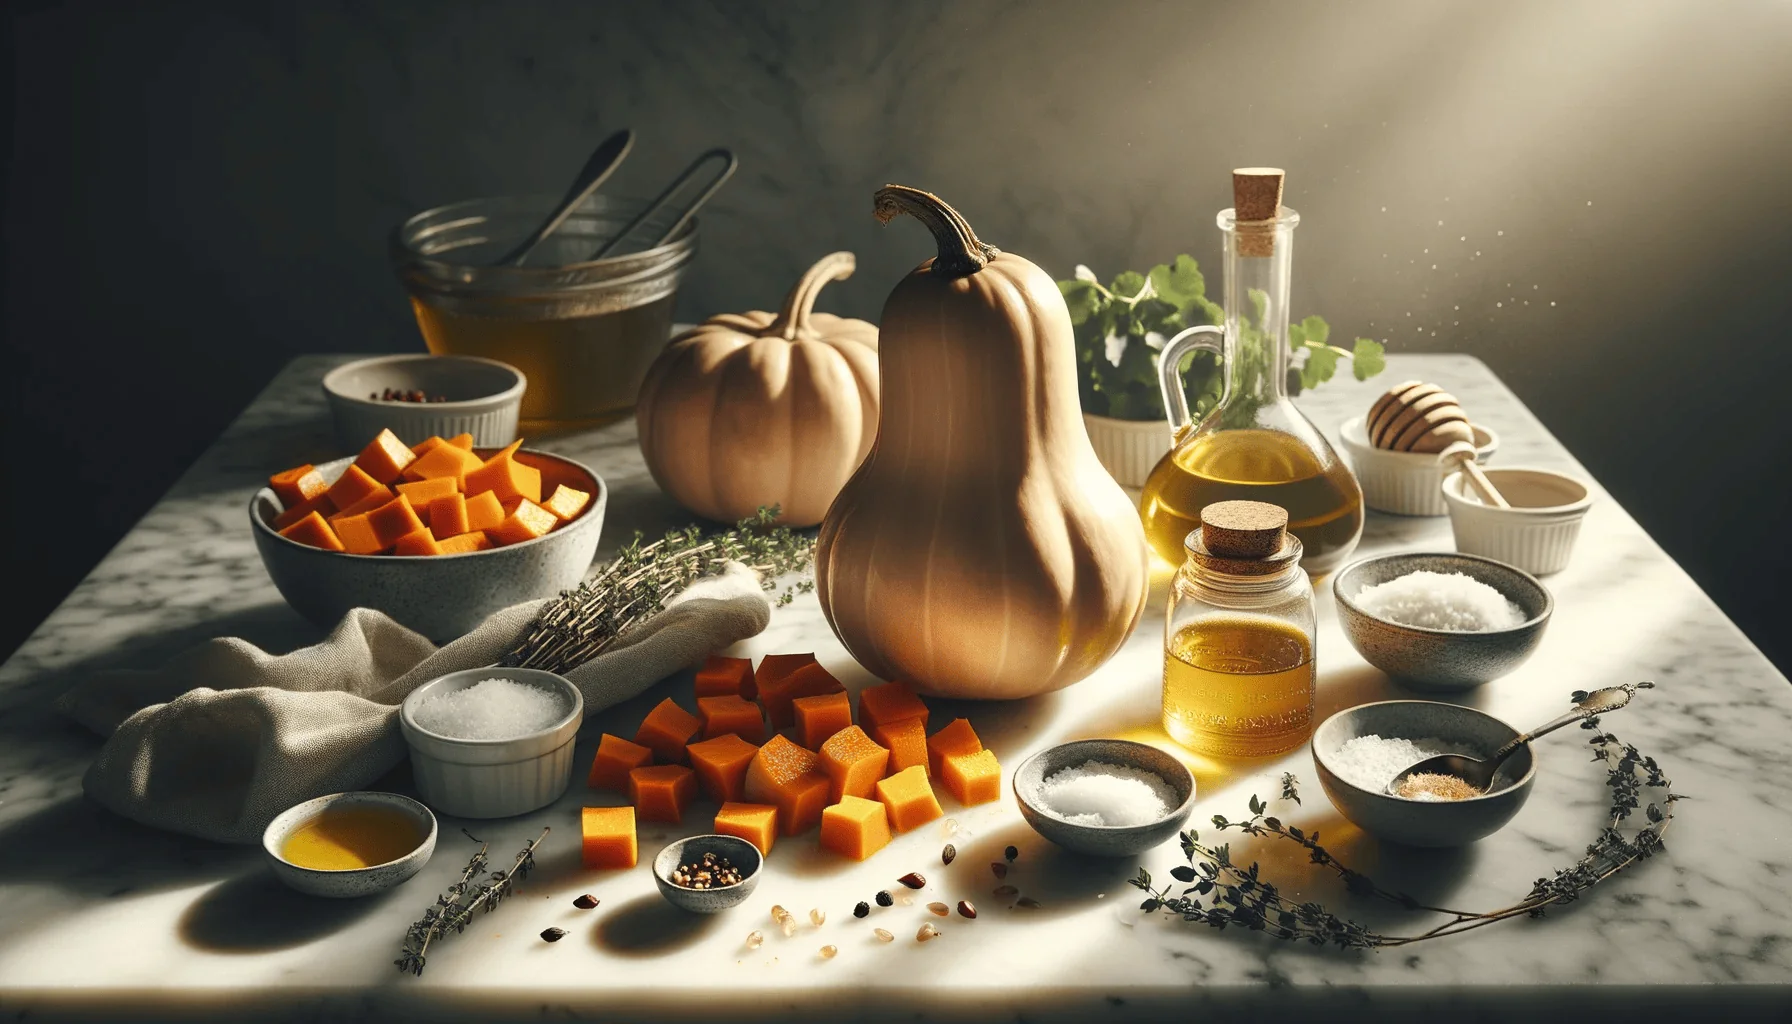 The ingredients for my honey-roasted butternut squash recipe